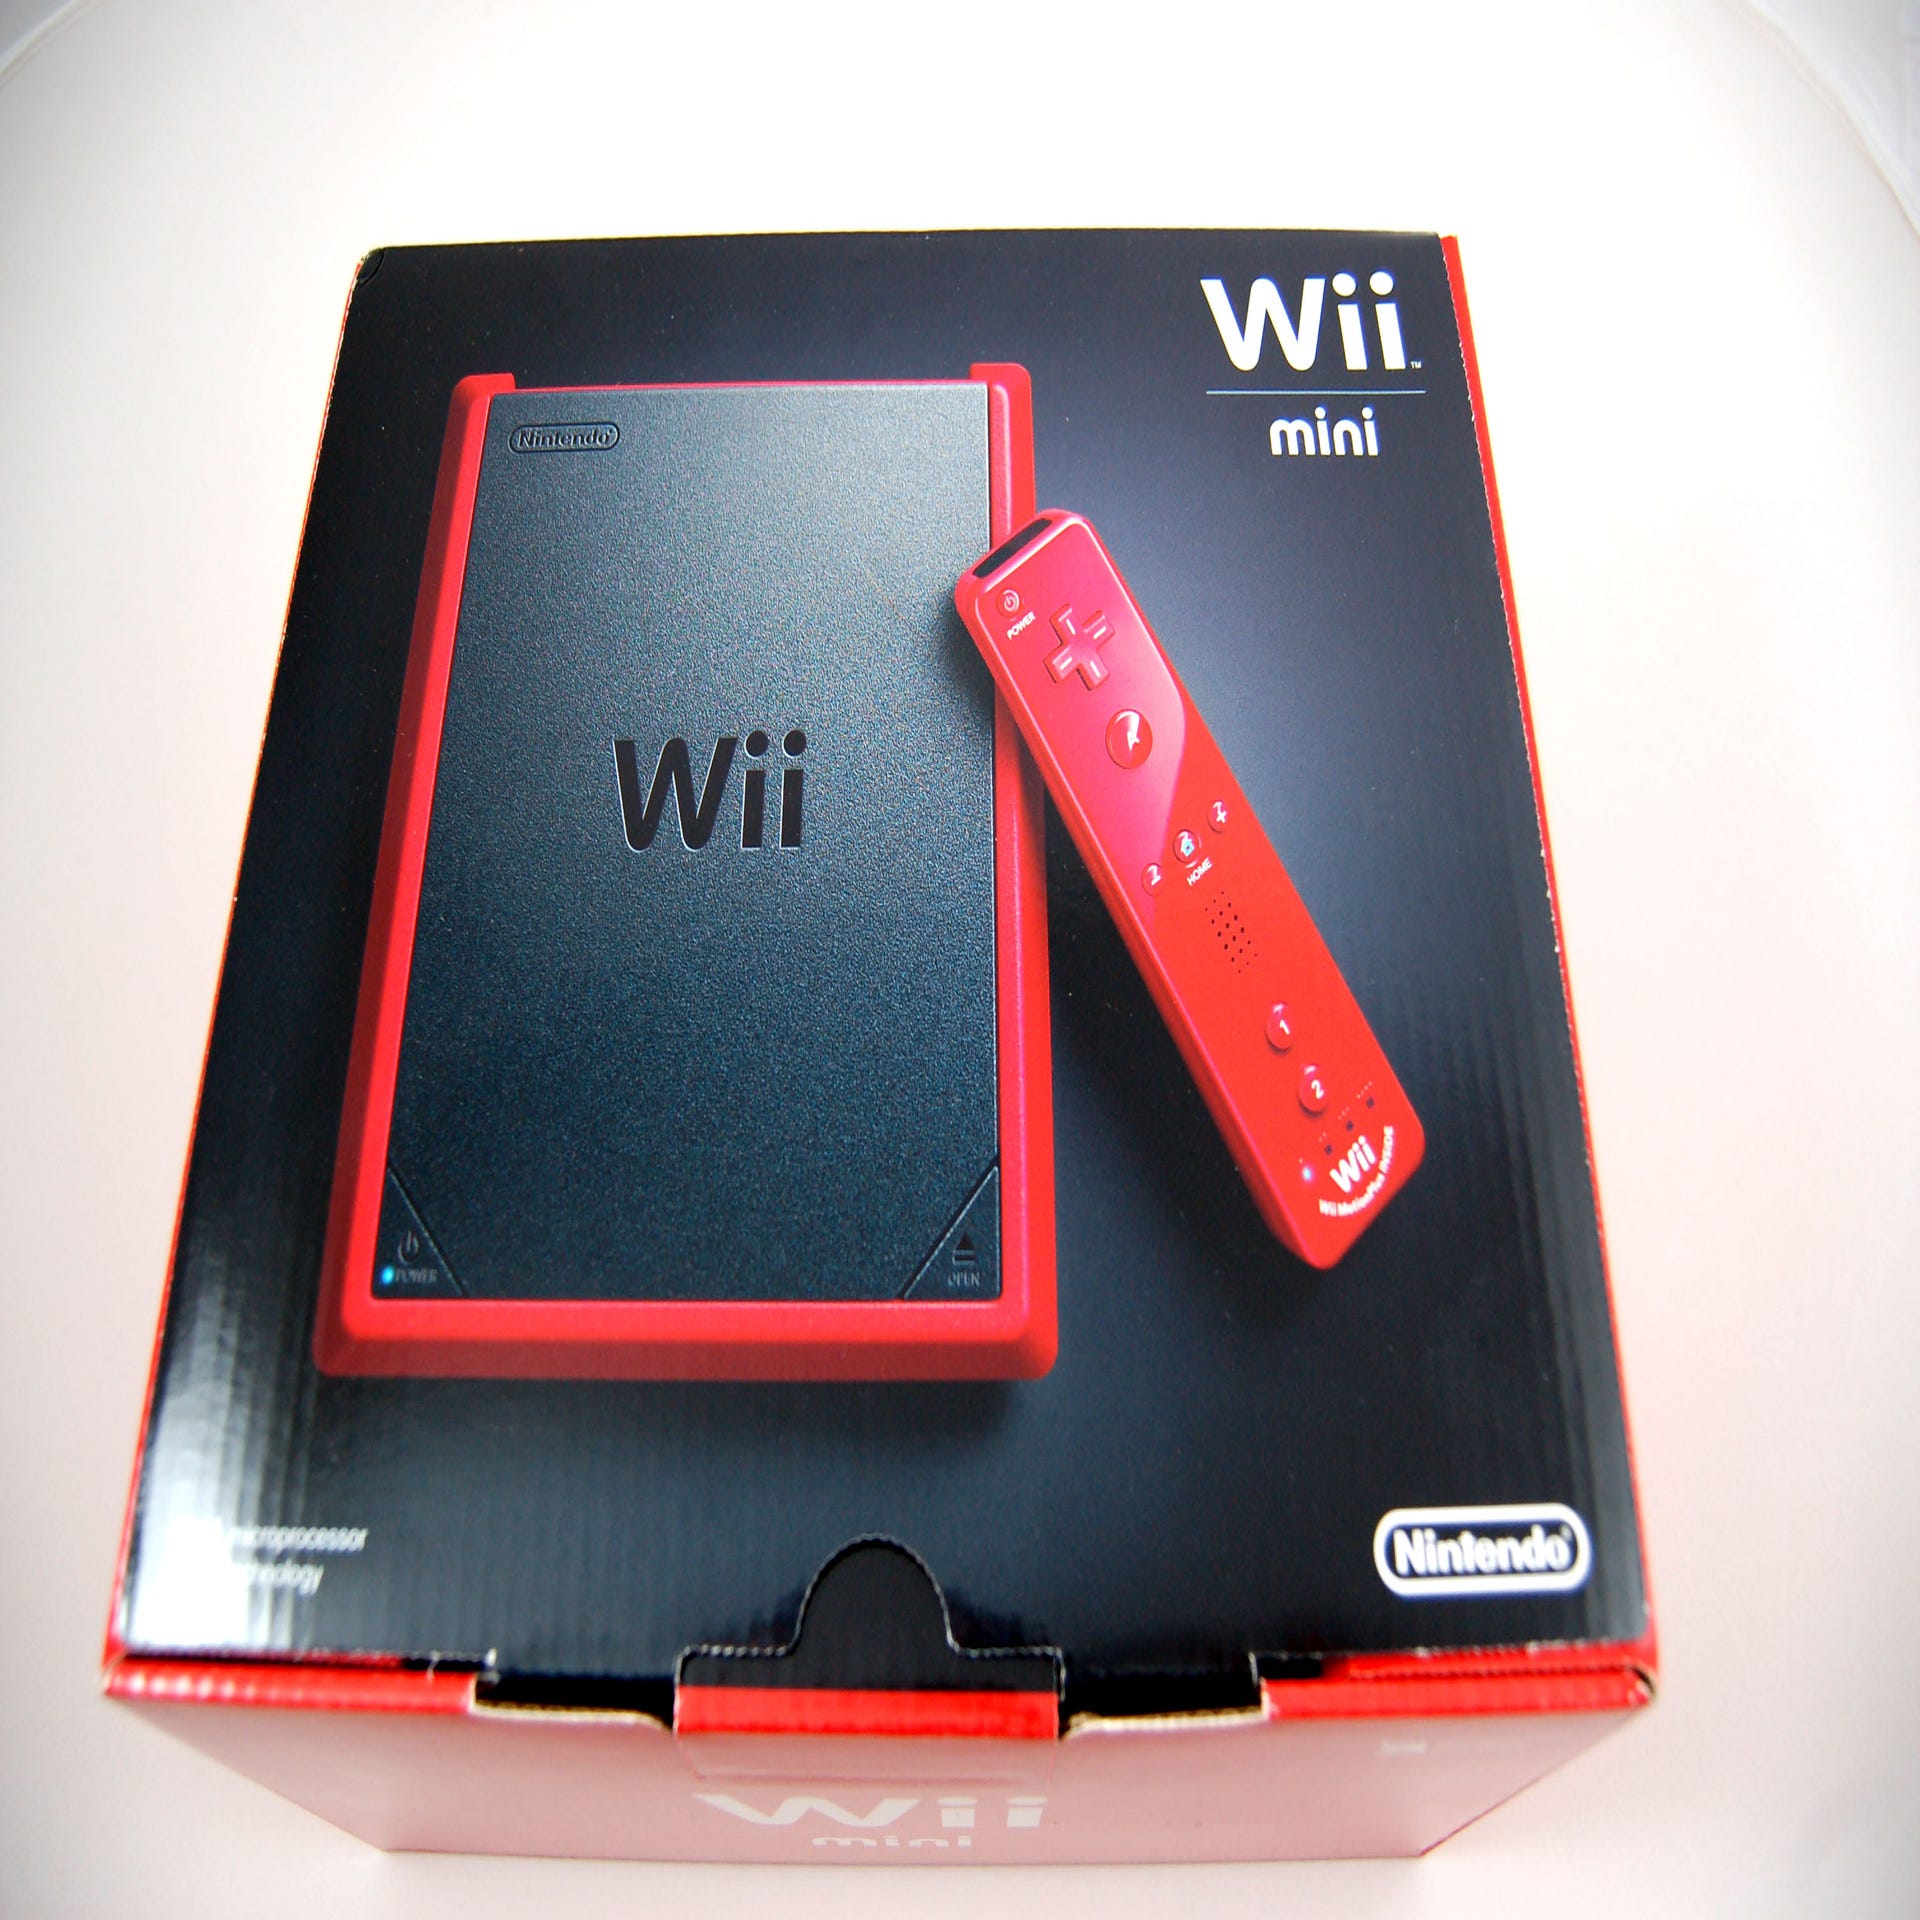 Nintendo Wii Mini review: Mini in all the wrong ways - CNET